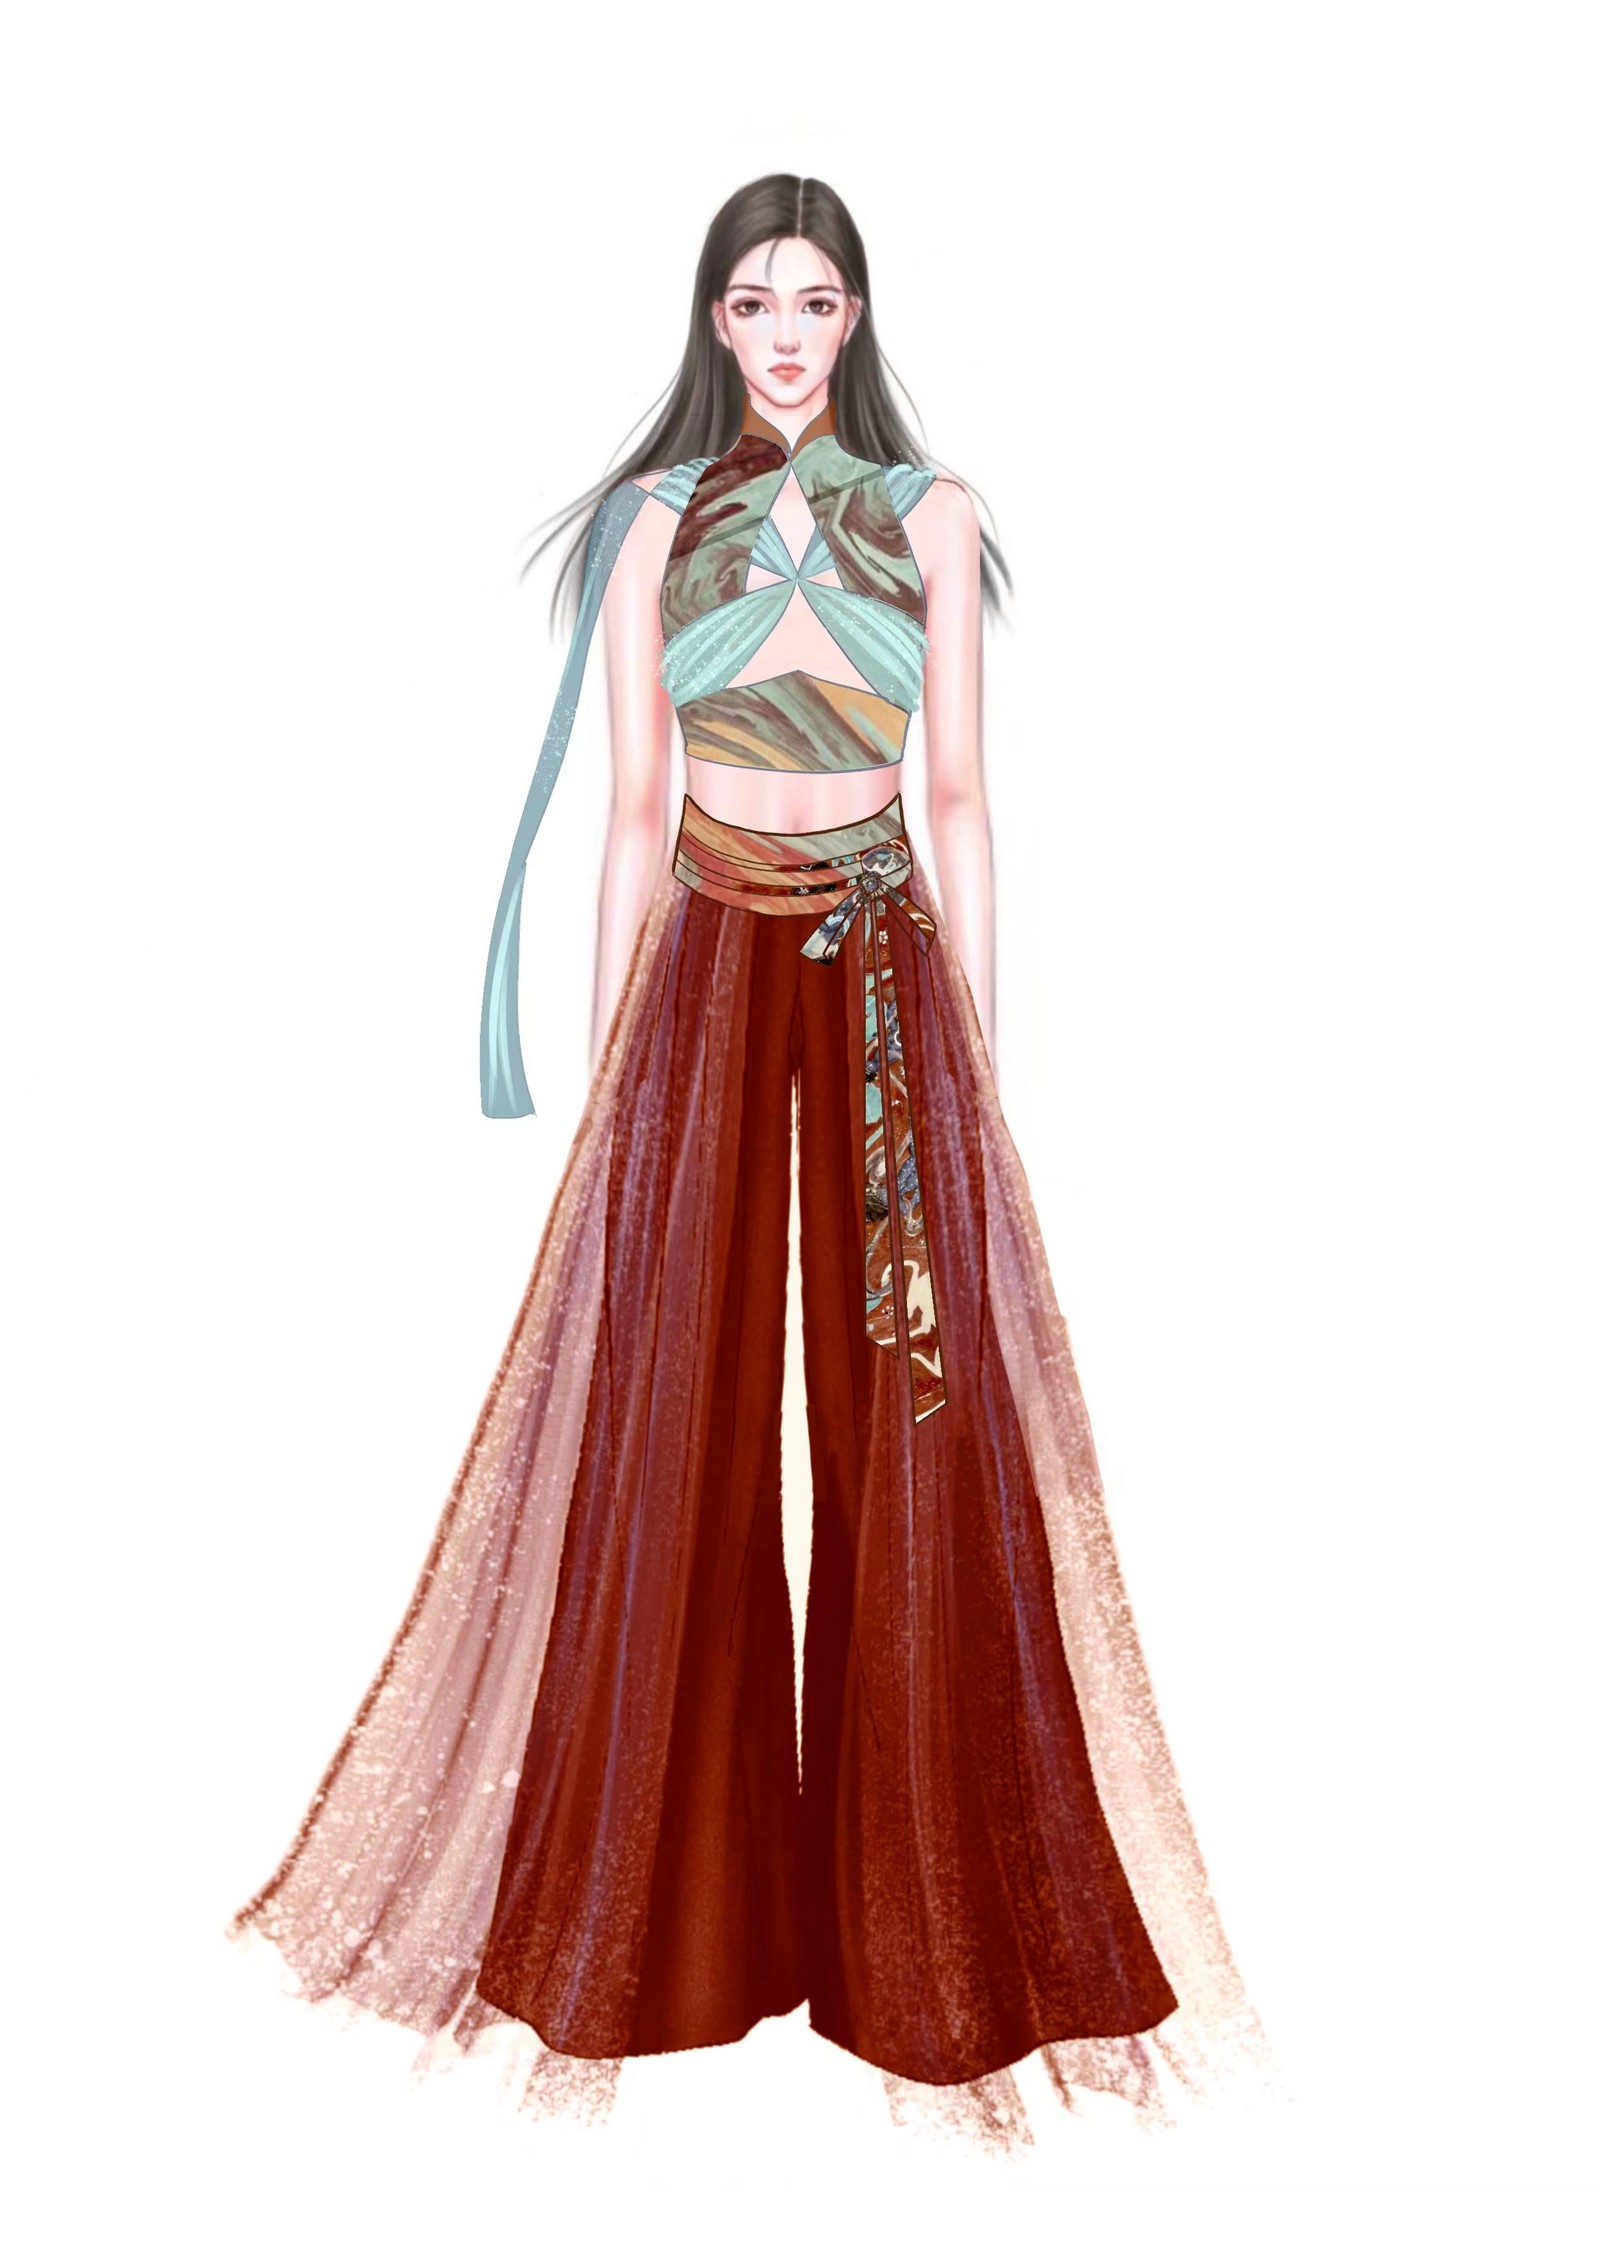 Dunhuang costume Design (2)